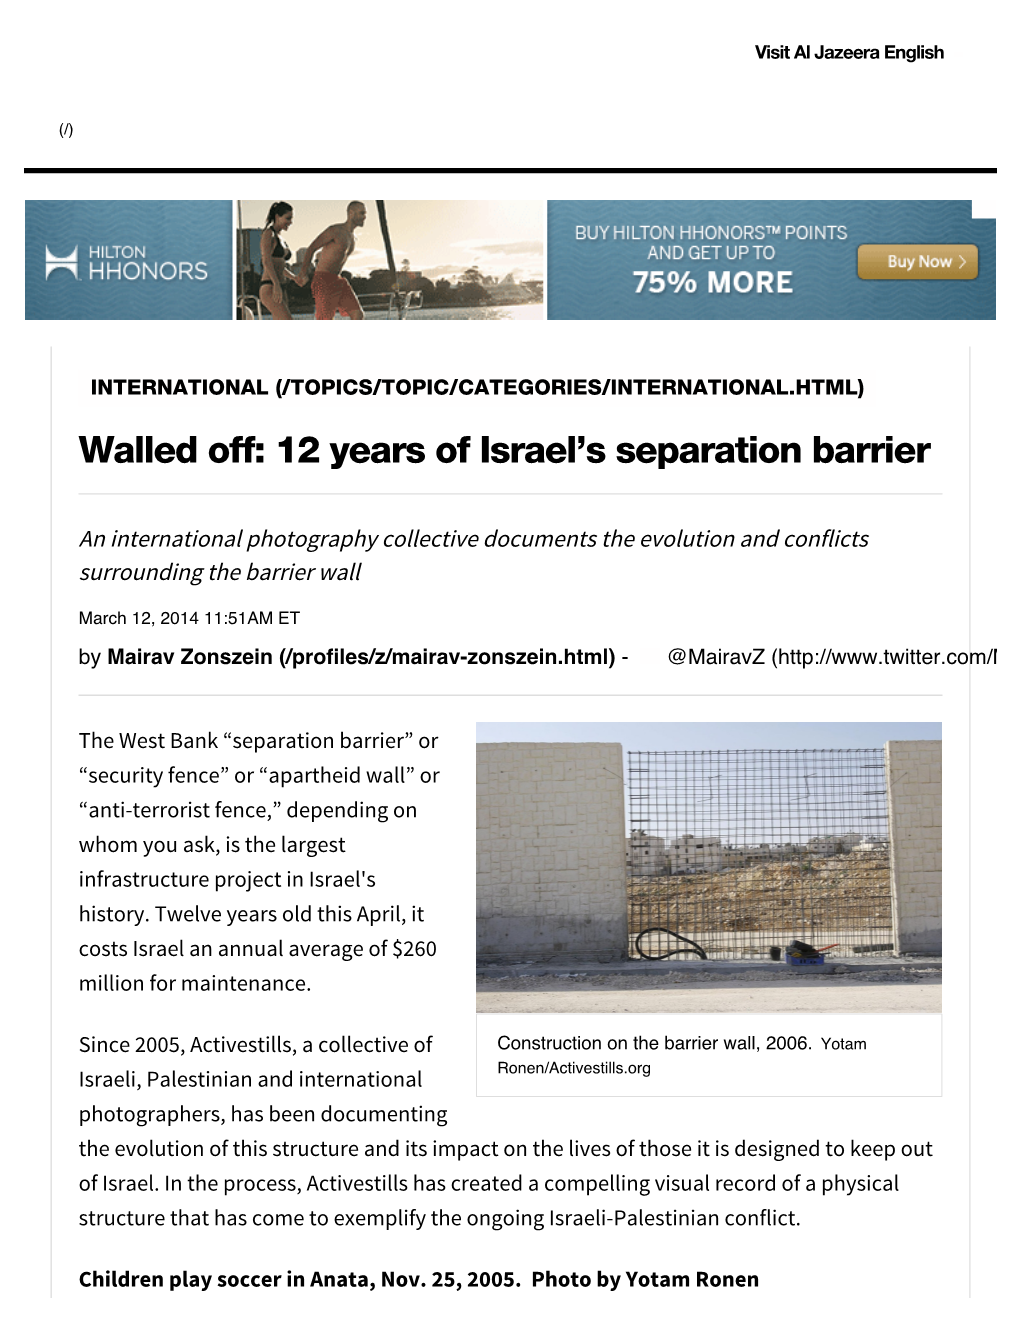 Walled Off: 12 Years of Israel's Separation Barrier